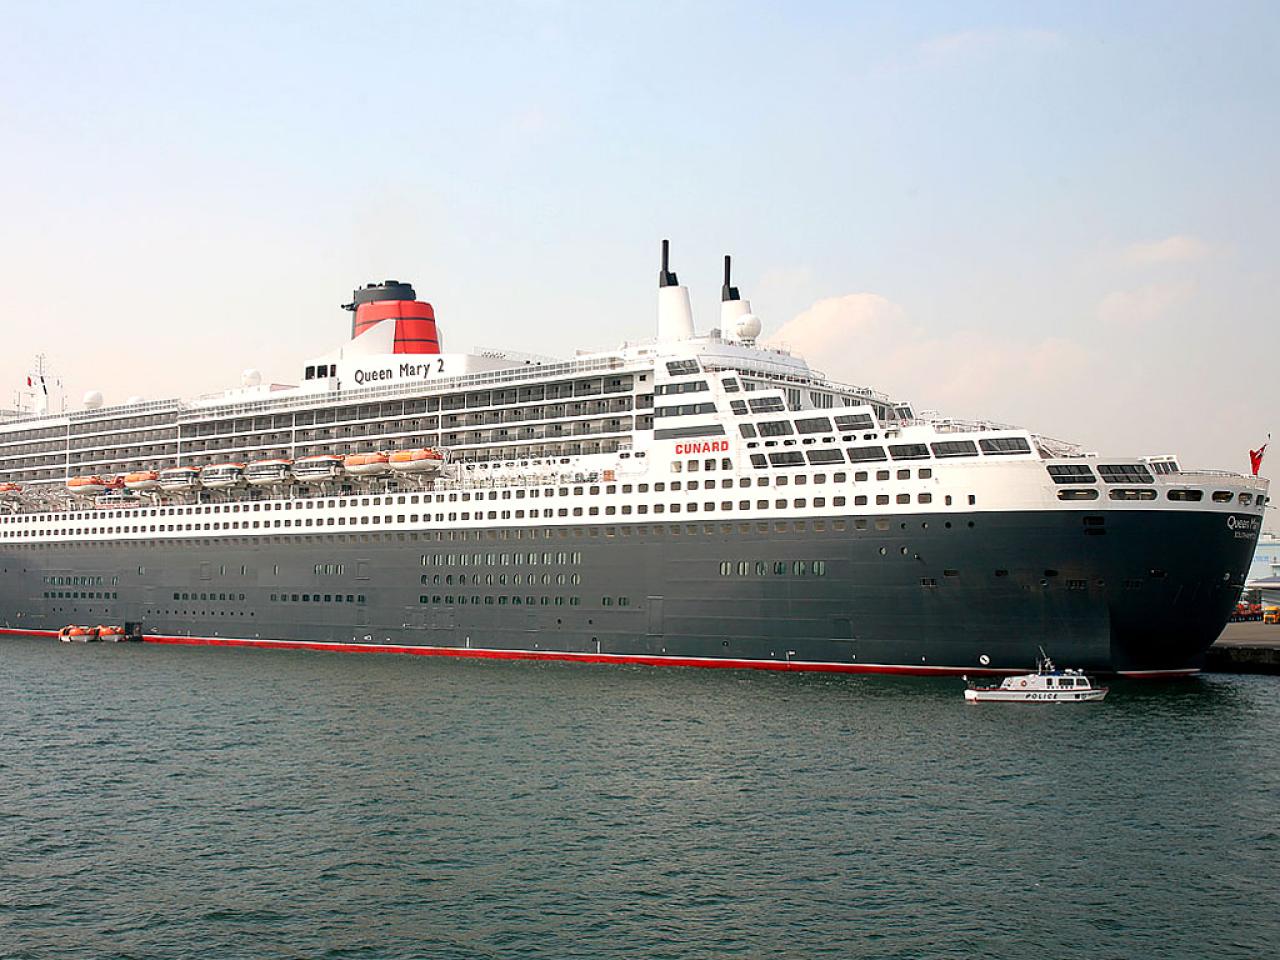 The Queen Mary 2 | Travel Channel